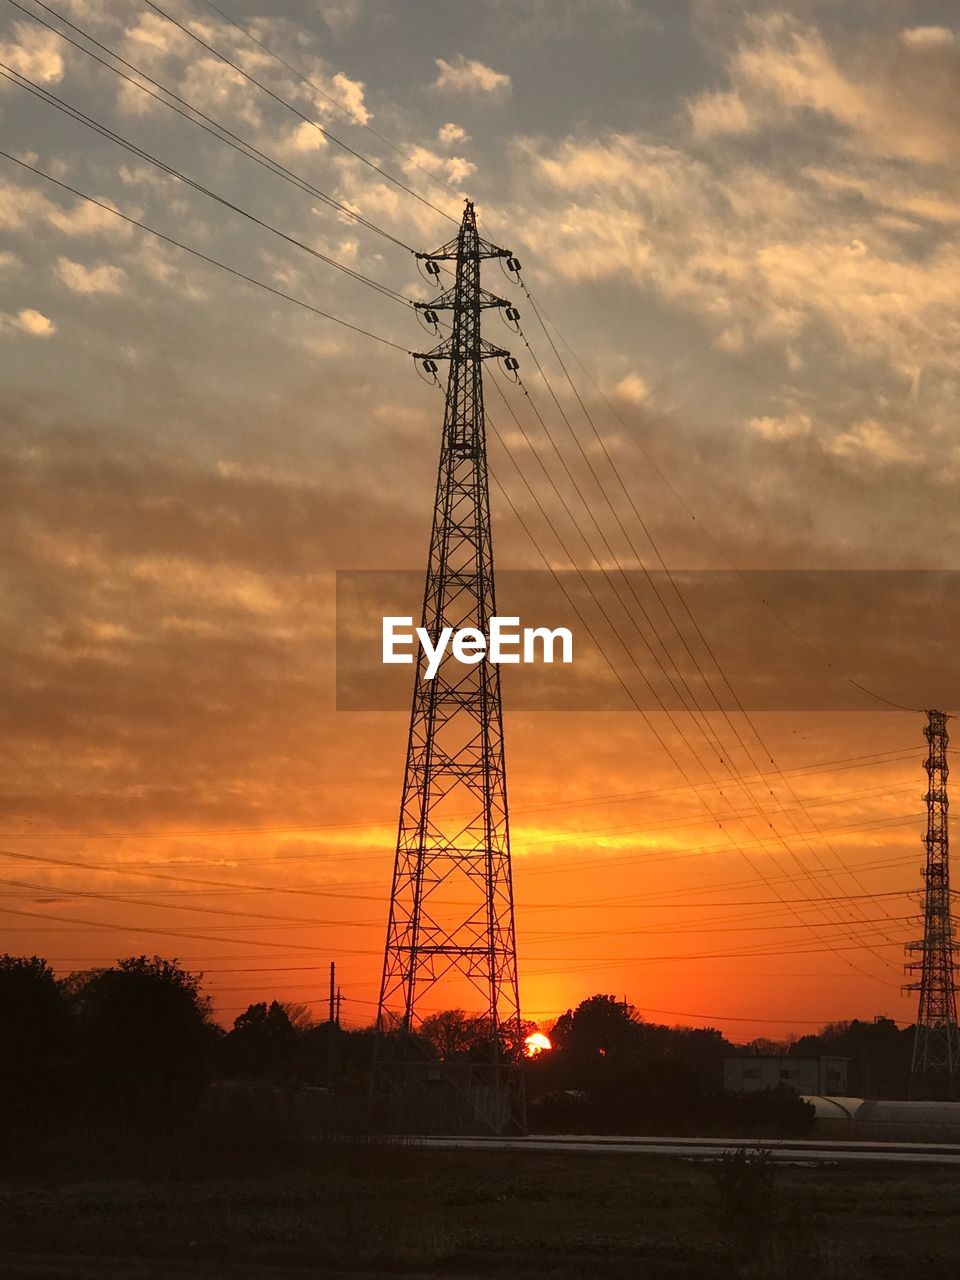 LOW ANGLE VIEW OF ELECTRICITY PYLON AGAINST ORANGE SKY